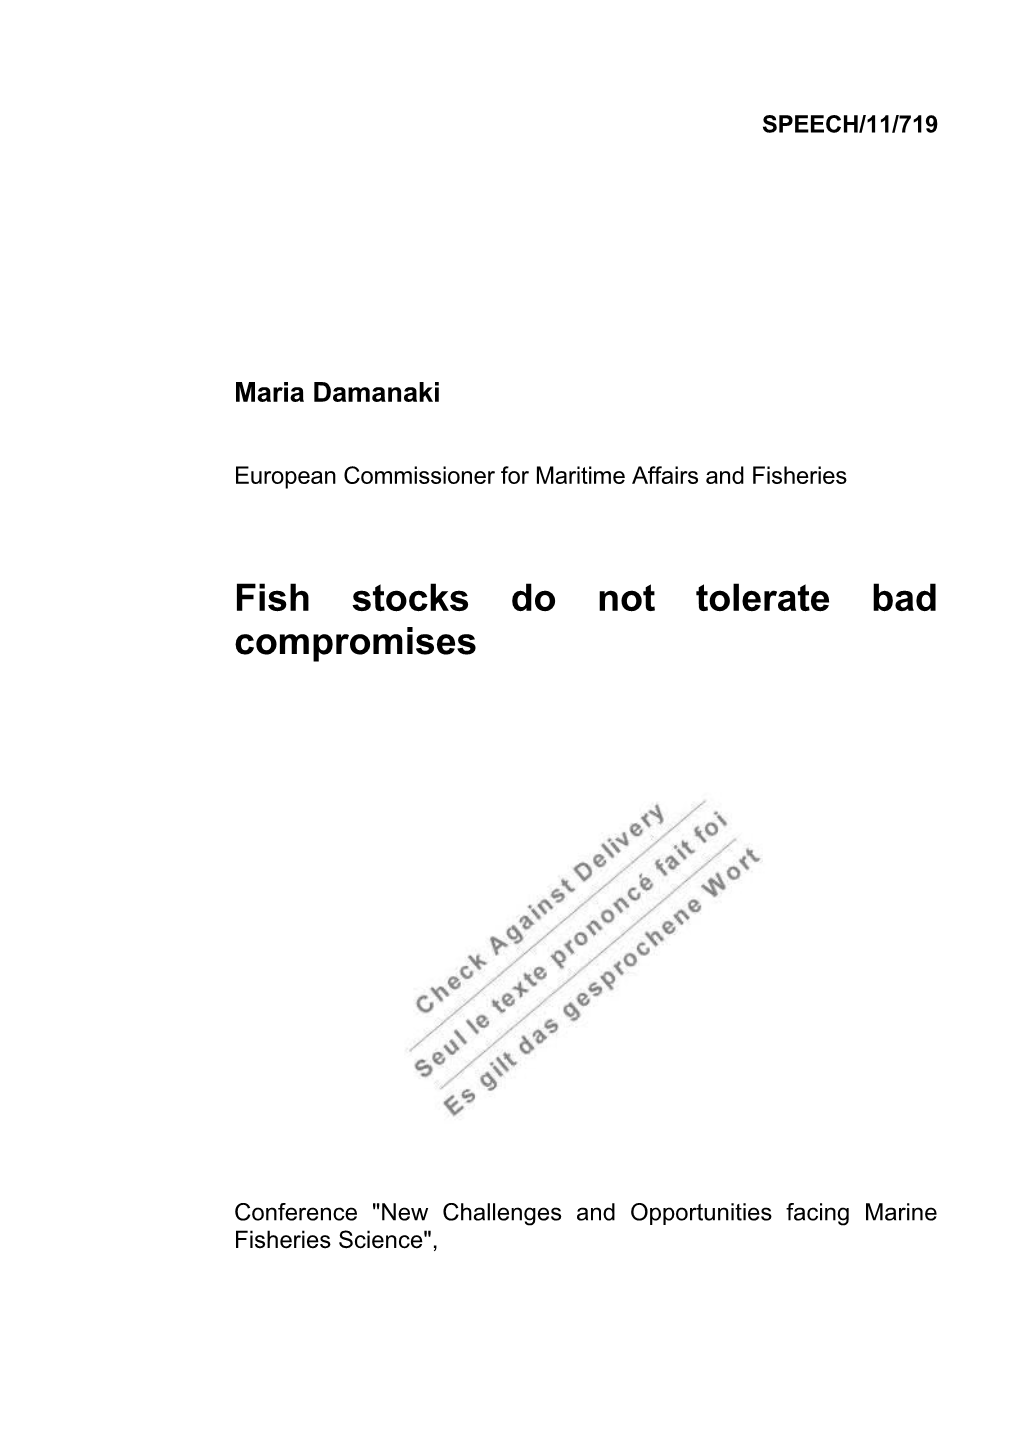 Fish Stocks Do Not Tolerate Bad Compromises